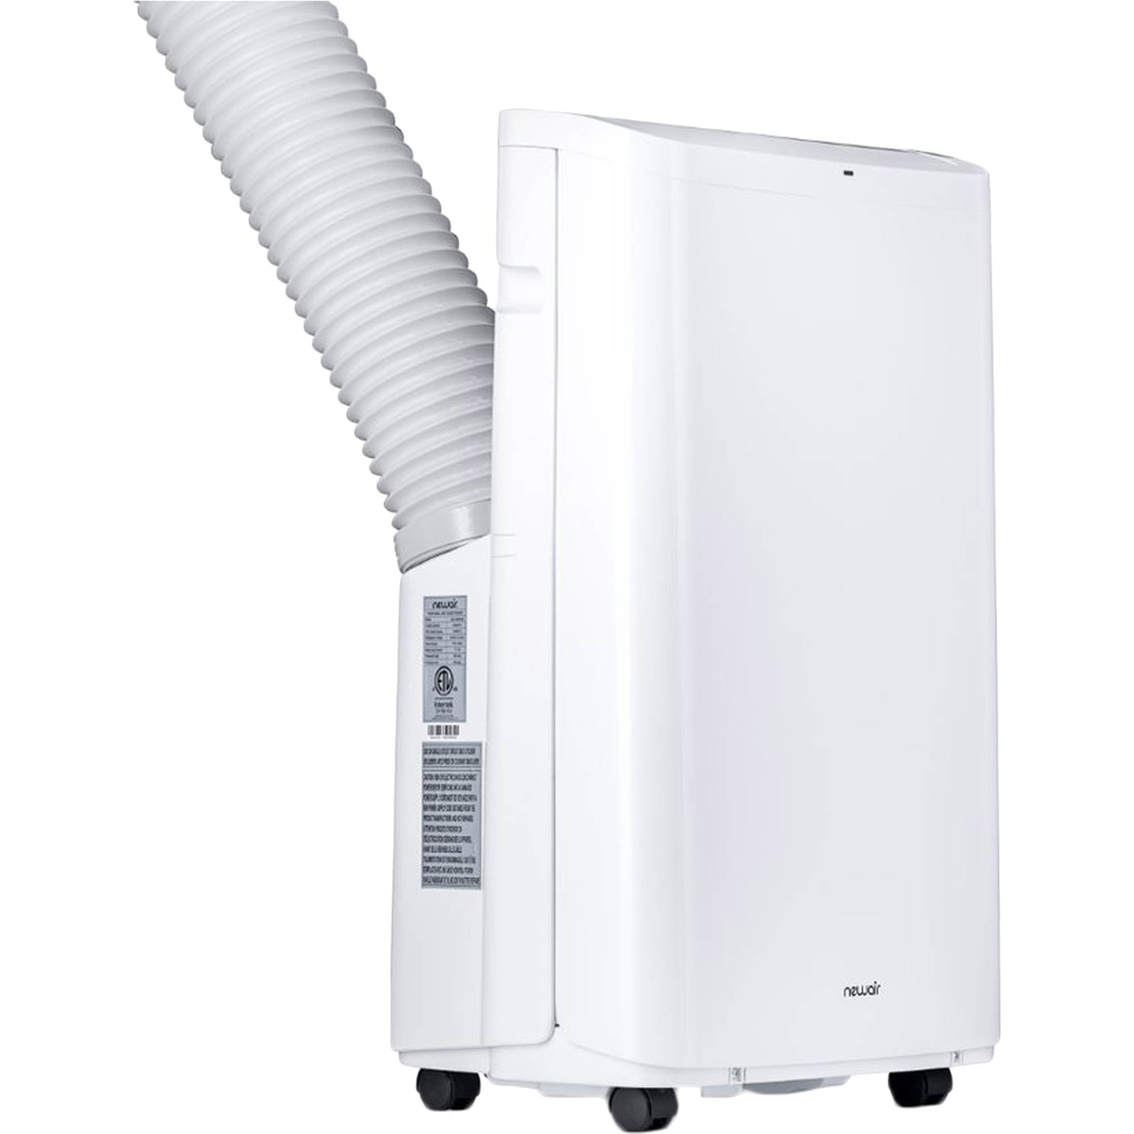 NewAir Compact 14,000 BTU Portable Air Conditioner - Image 7 of 10